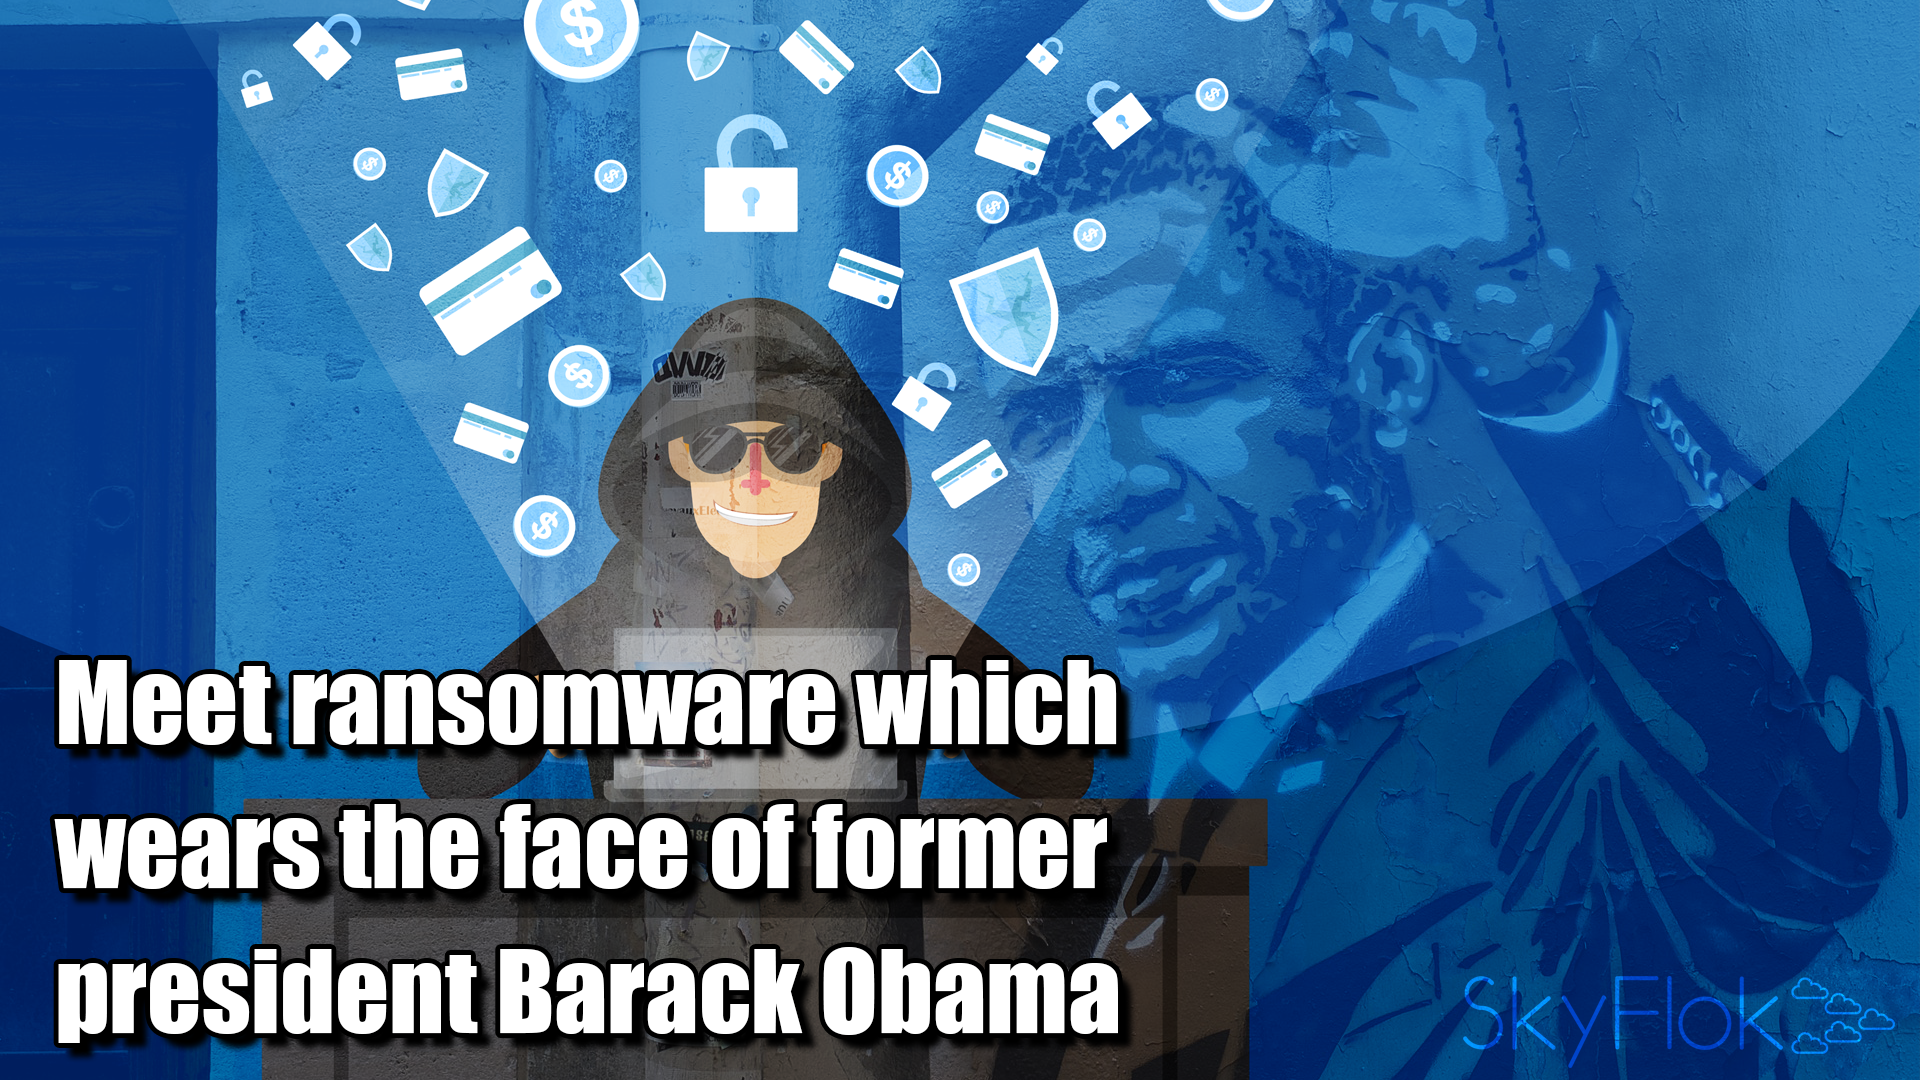 Meet ransomware which wears the face of former president Barack Obama